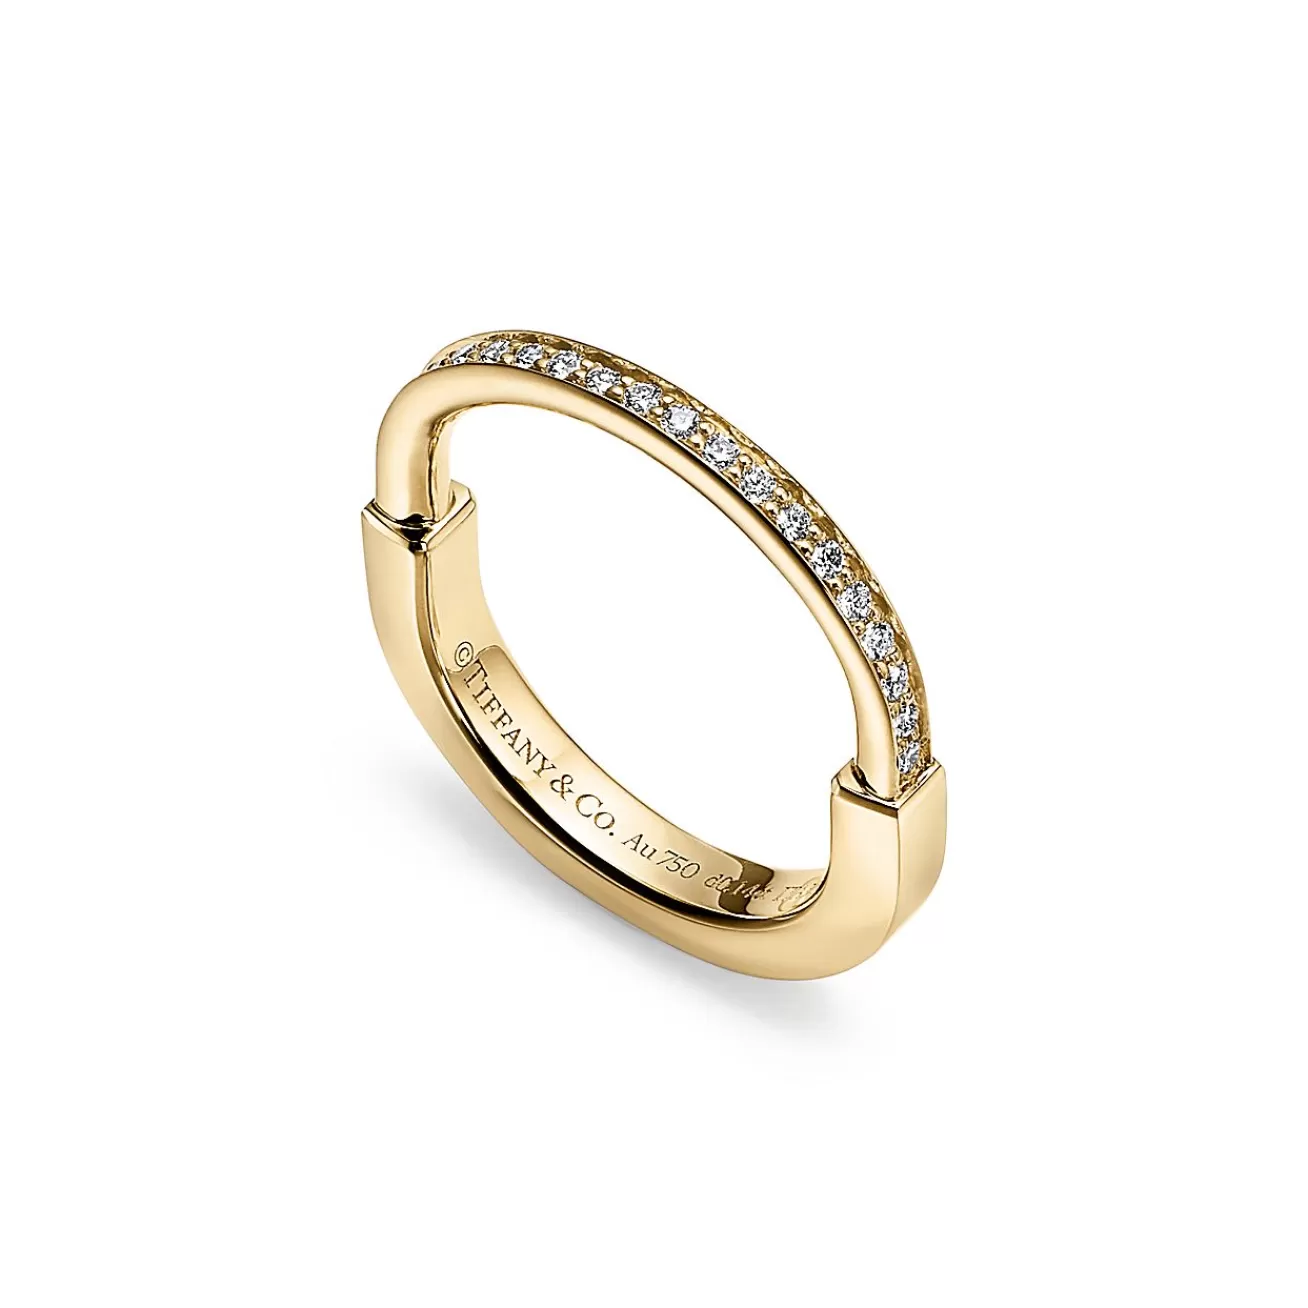 Tiffany & Co. Tiffany Lock Ring in Yellow Gold with Diamonds | ^ Rings | Gifts for Her